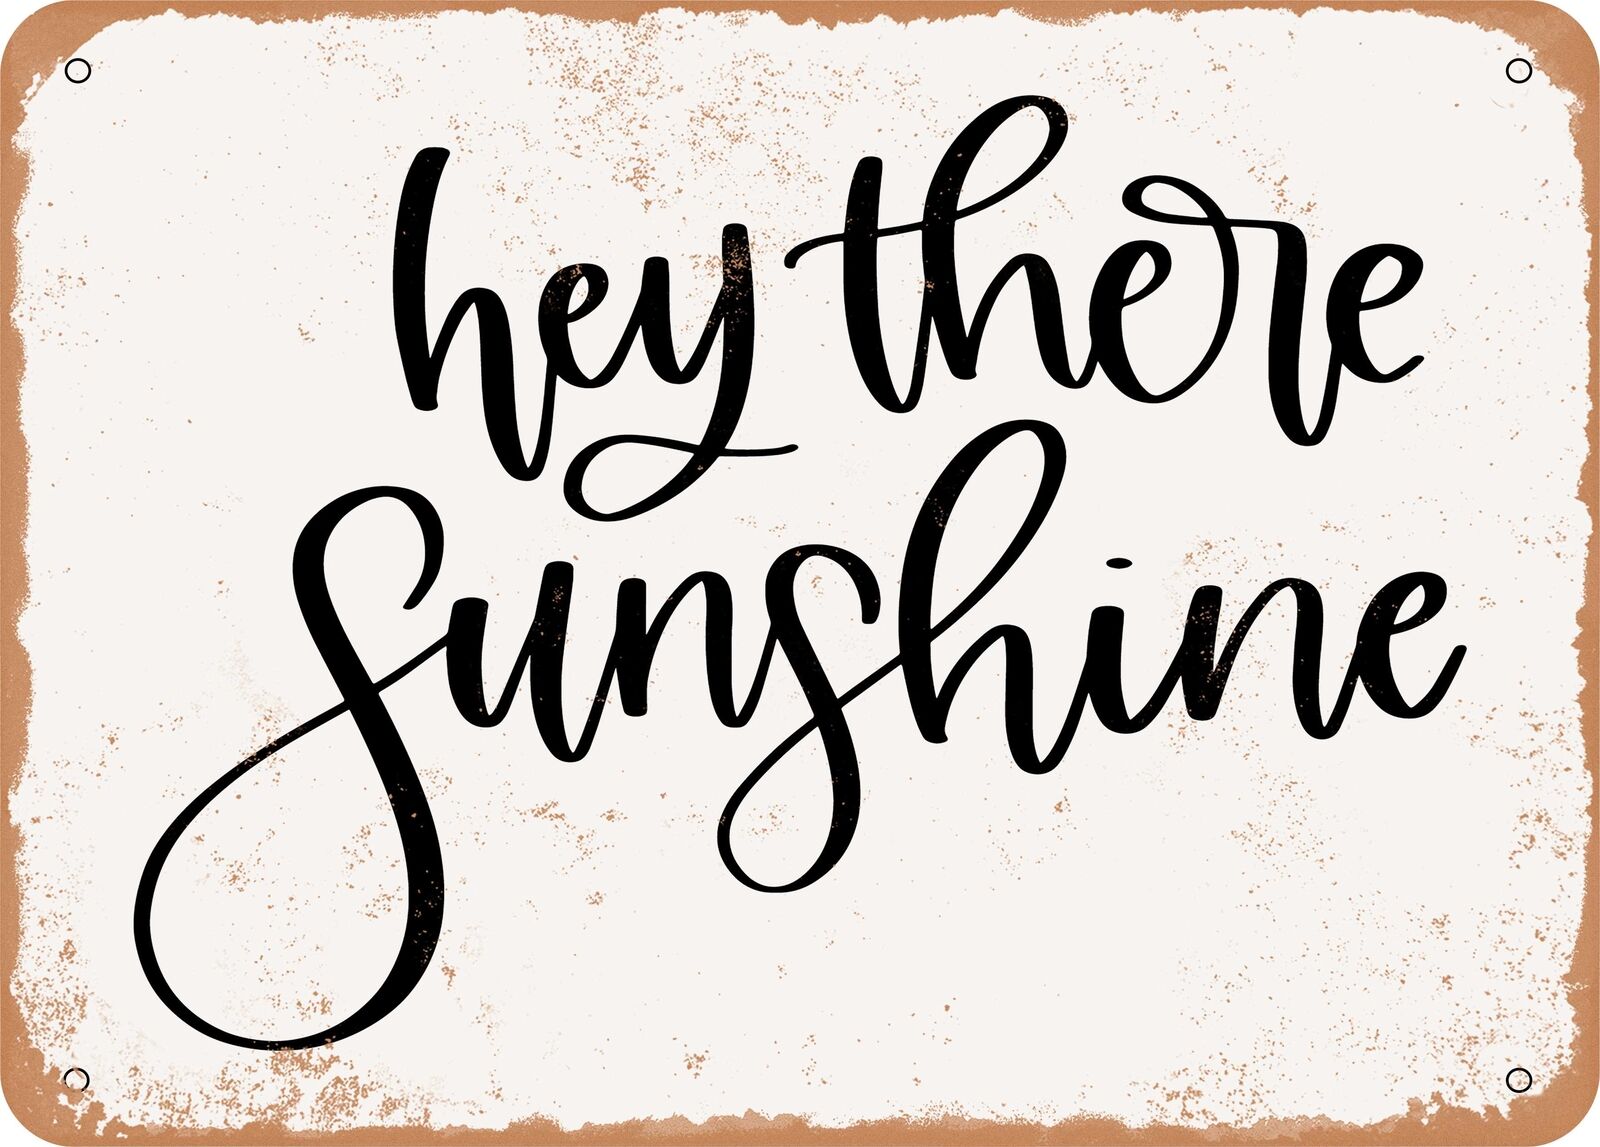 Metal Sign - Hey there Sunshine - Vintage Rusty Look Sign